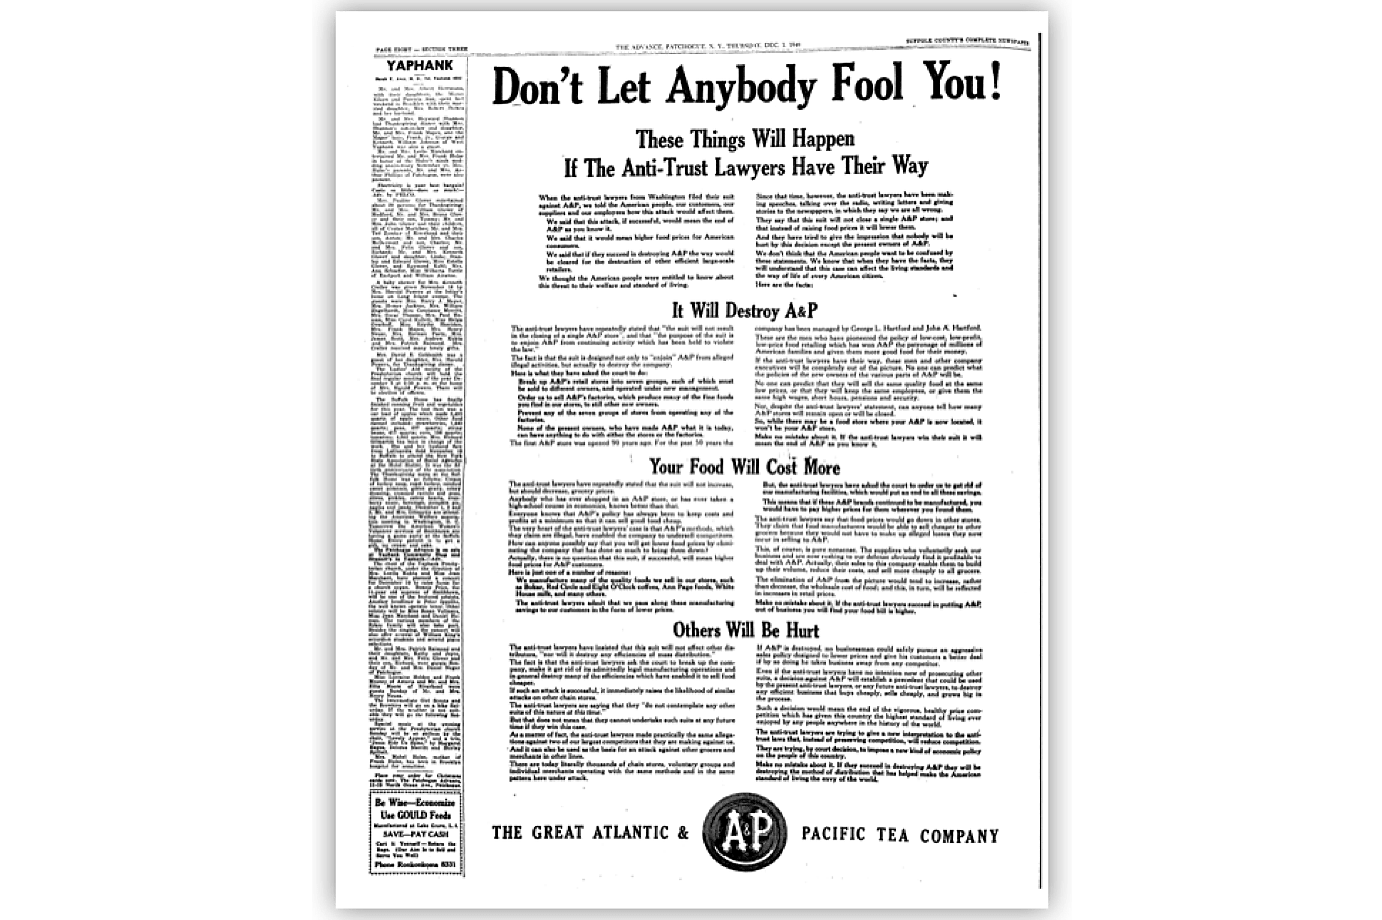 "Don't Let Anybody Fool You!" Newspaper Ad for A&P